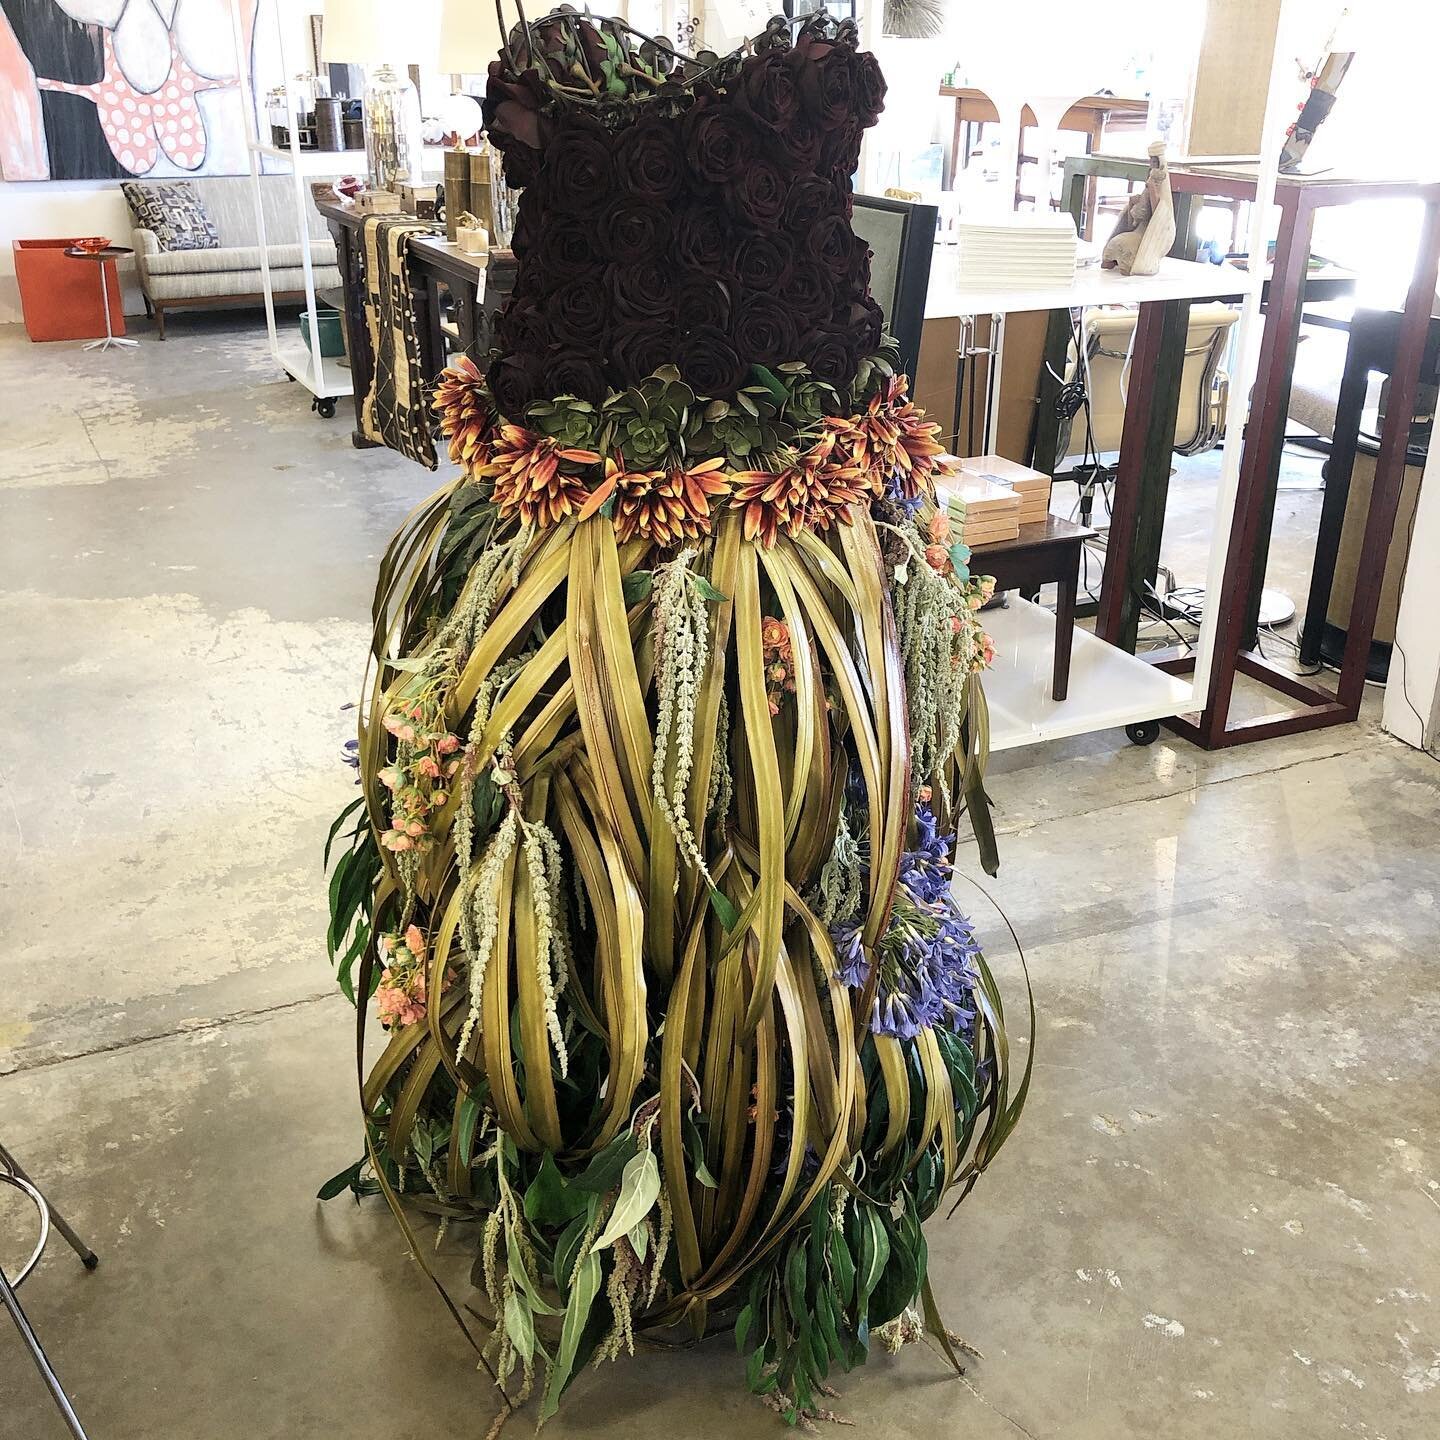 Ready for the Red Carpet. Eat your heart out Hollywood! A sculpture made of Purple roses and plastic flowers...a must for a visitor from another planet or just to dress up a room. #midcenturymodern #decor #artwork